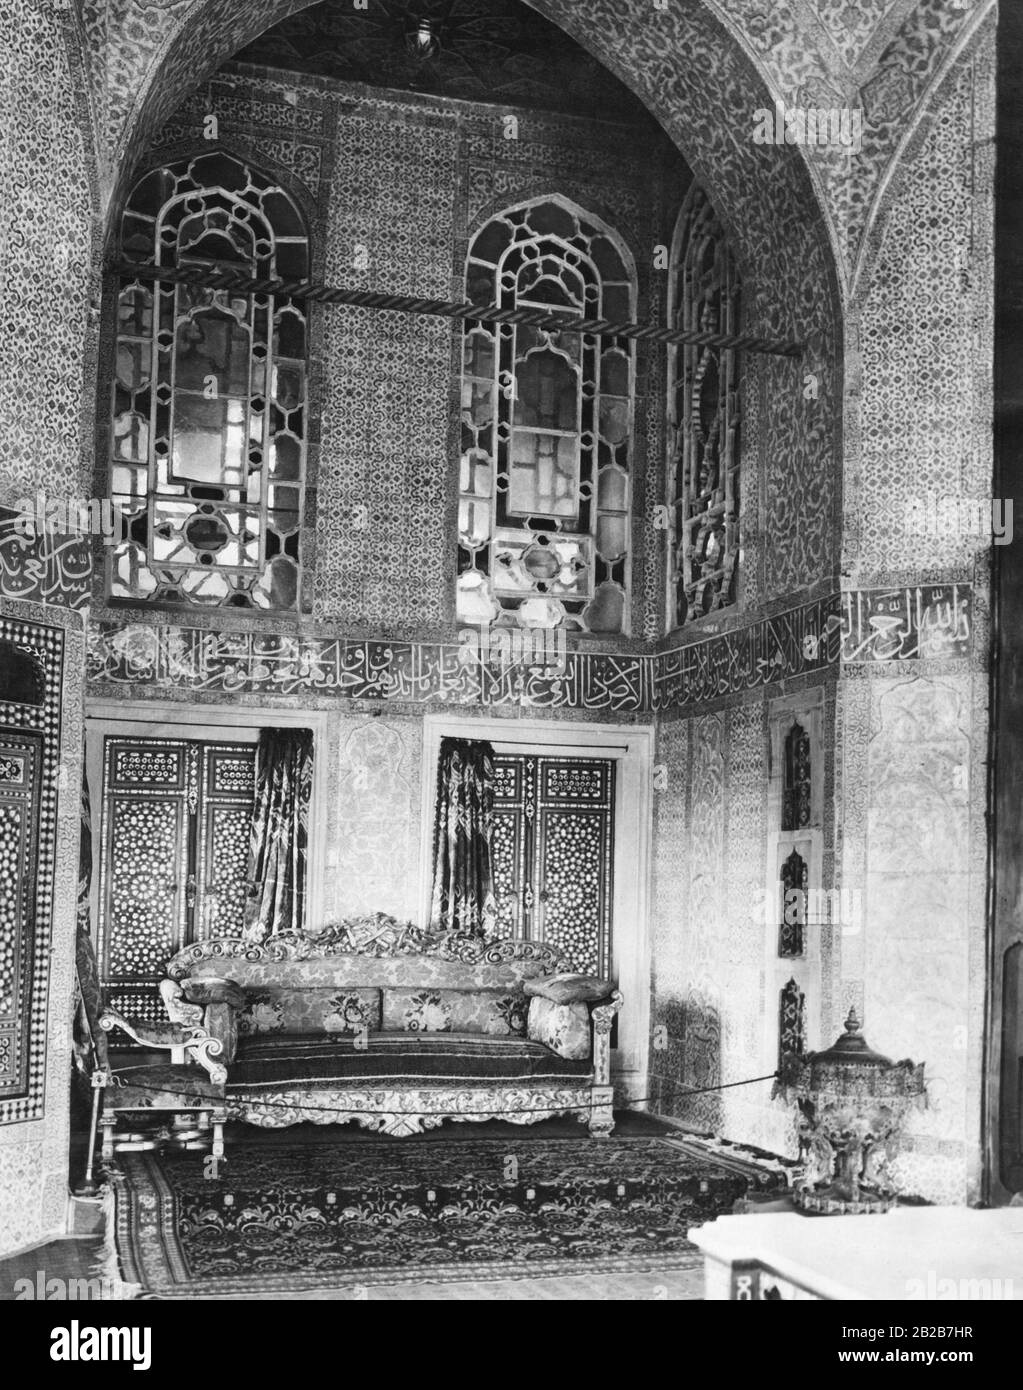 A room in an Ottoman sultan's palace, probably in the Topkapi Palace in Istanbul. Undated photo. Stock Photo